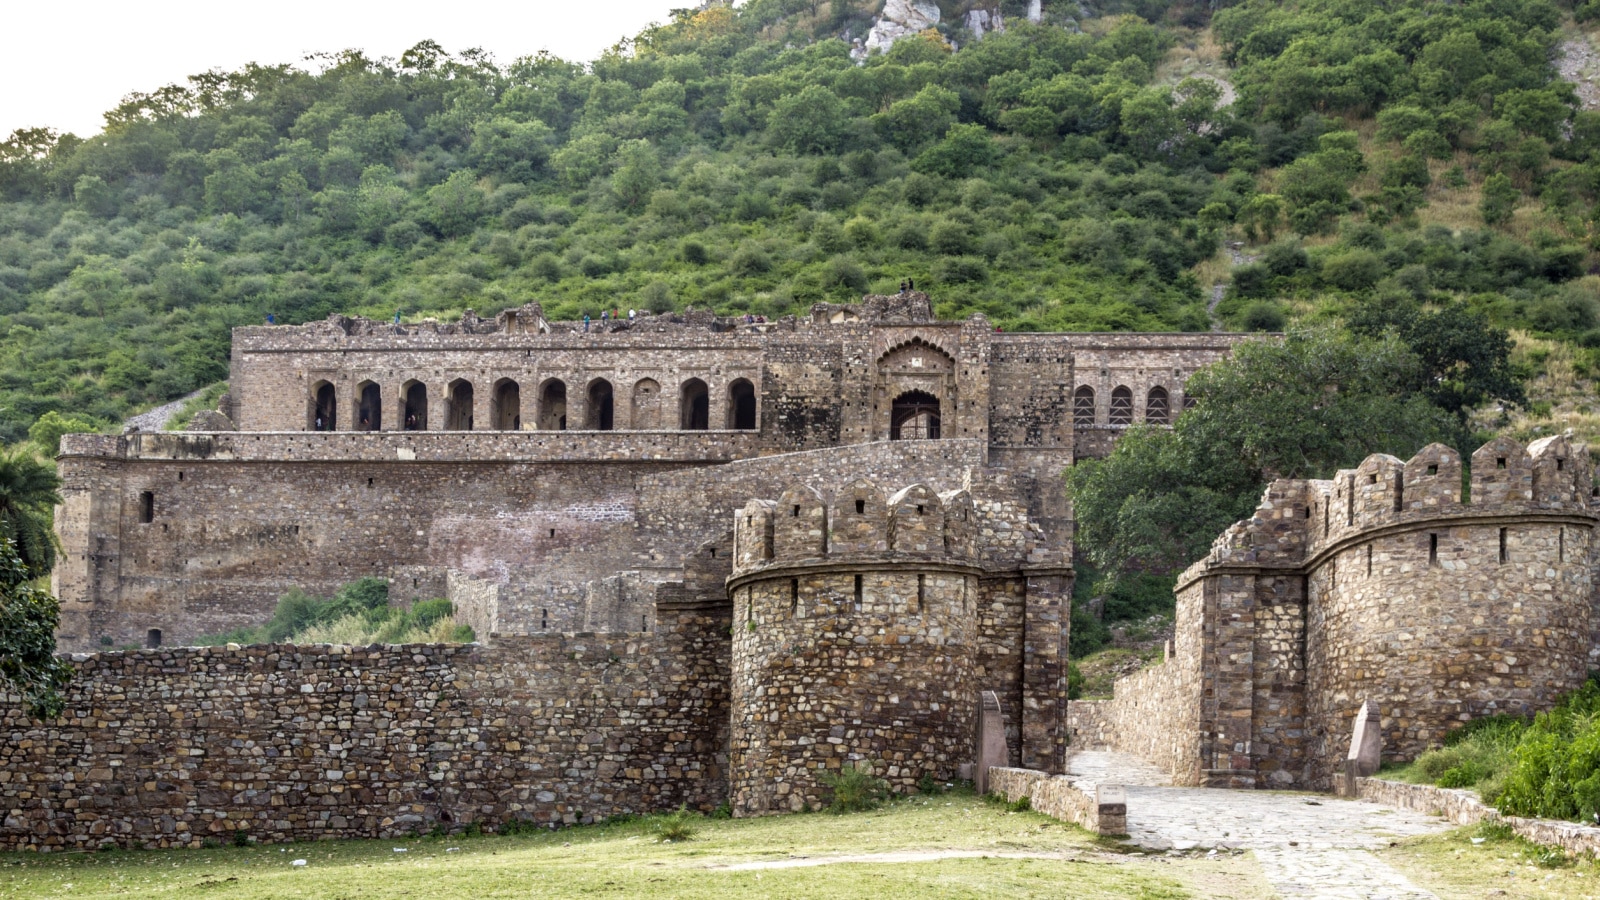 old Bhangarh Fort in India